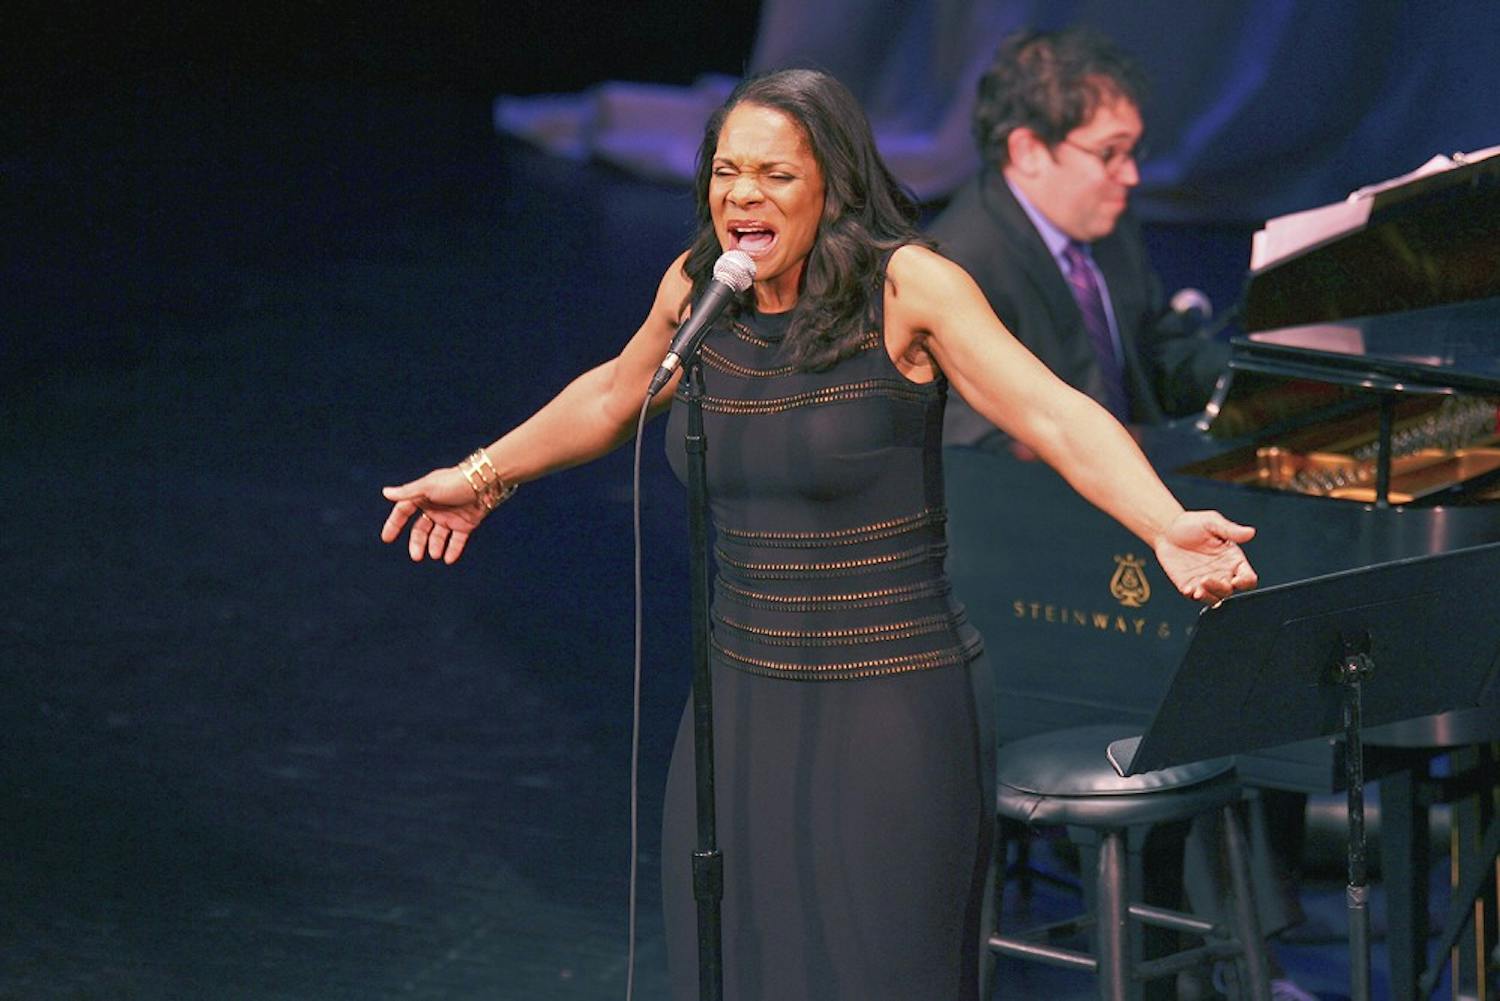 Six-time Tony Award winner Audra McDonald performs a ahow of broadway standards in Memorial Hall Friday night.